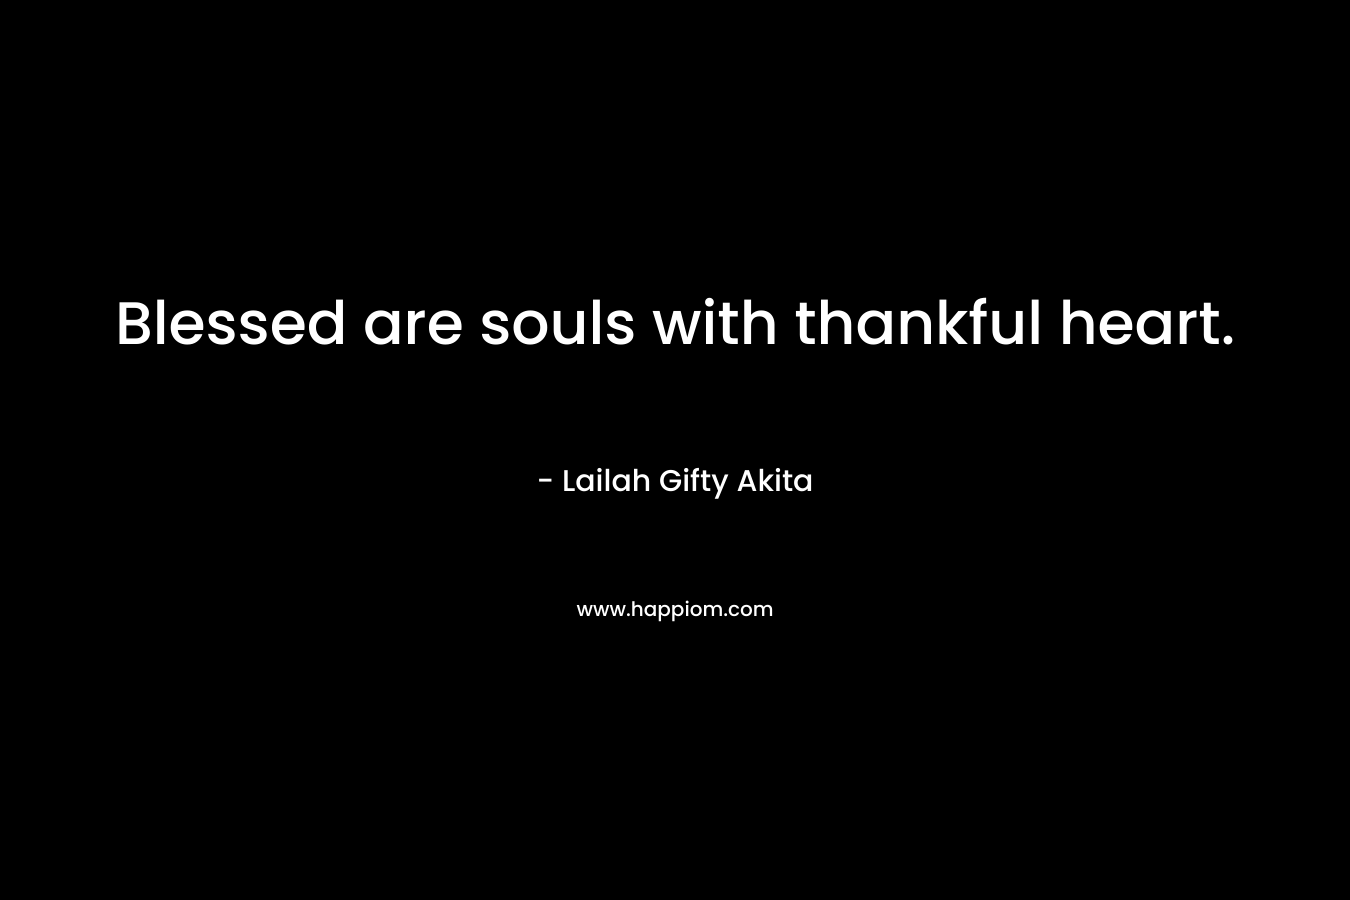 Blessed are souls with thankful heart.